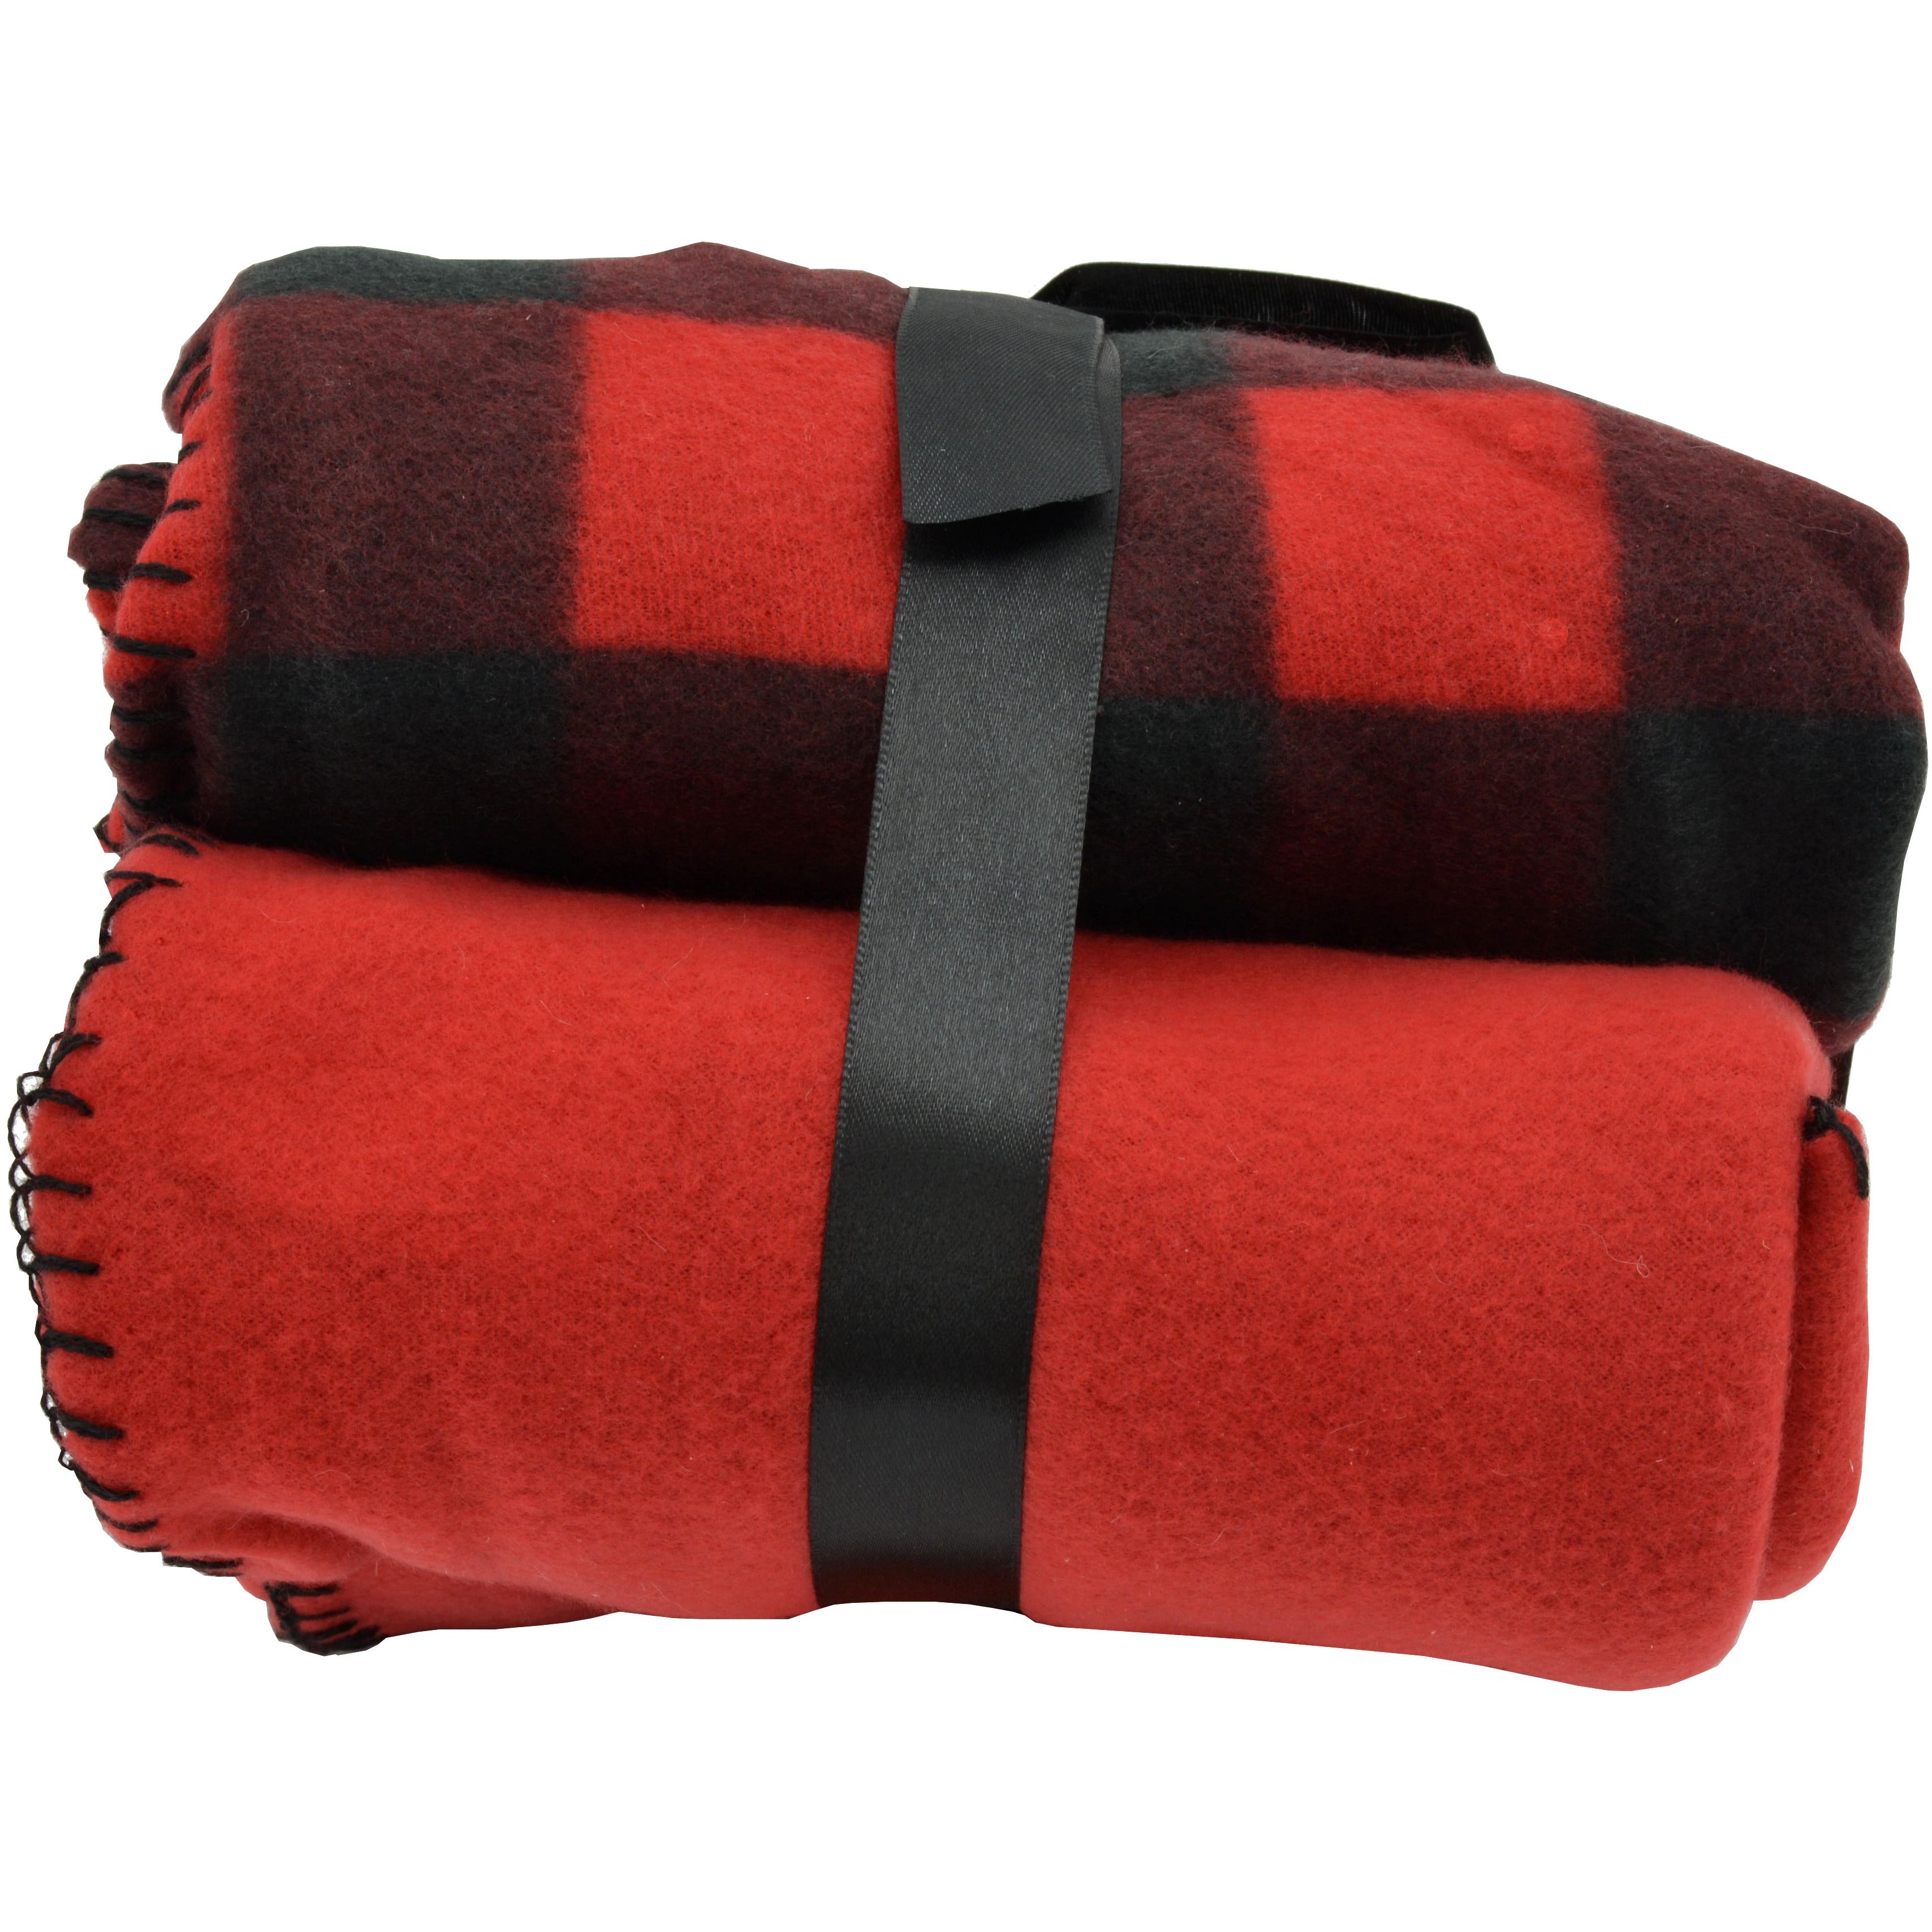 Safdie Buffalo Plaid Fleece Throw / 2 Pack / Couch Blanket / 50" x 60" / Various Colours